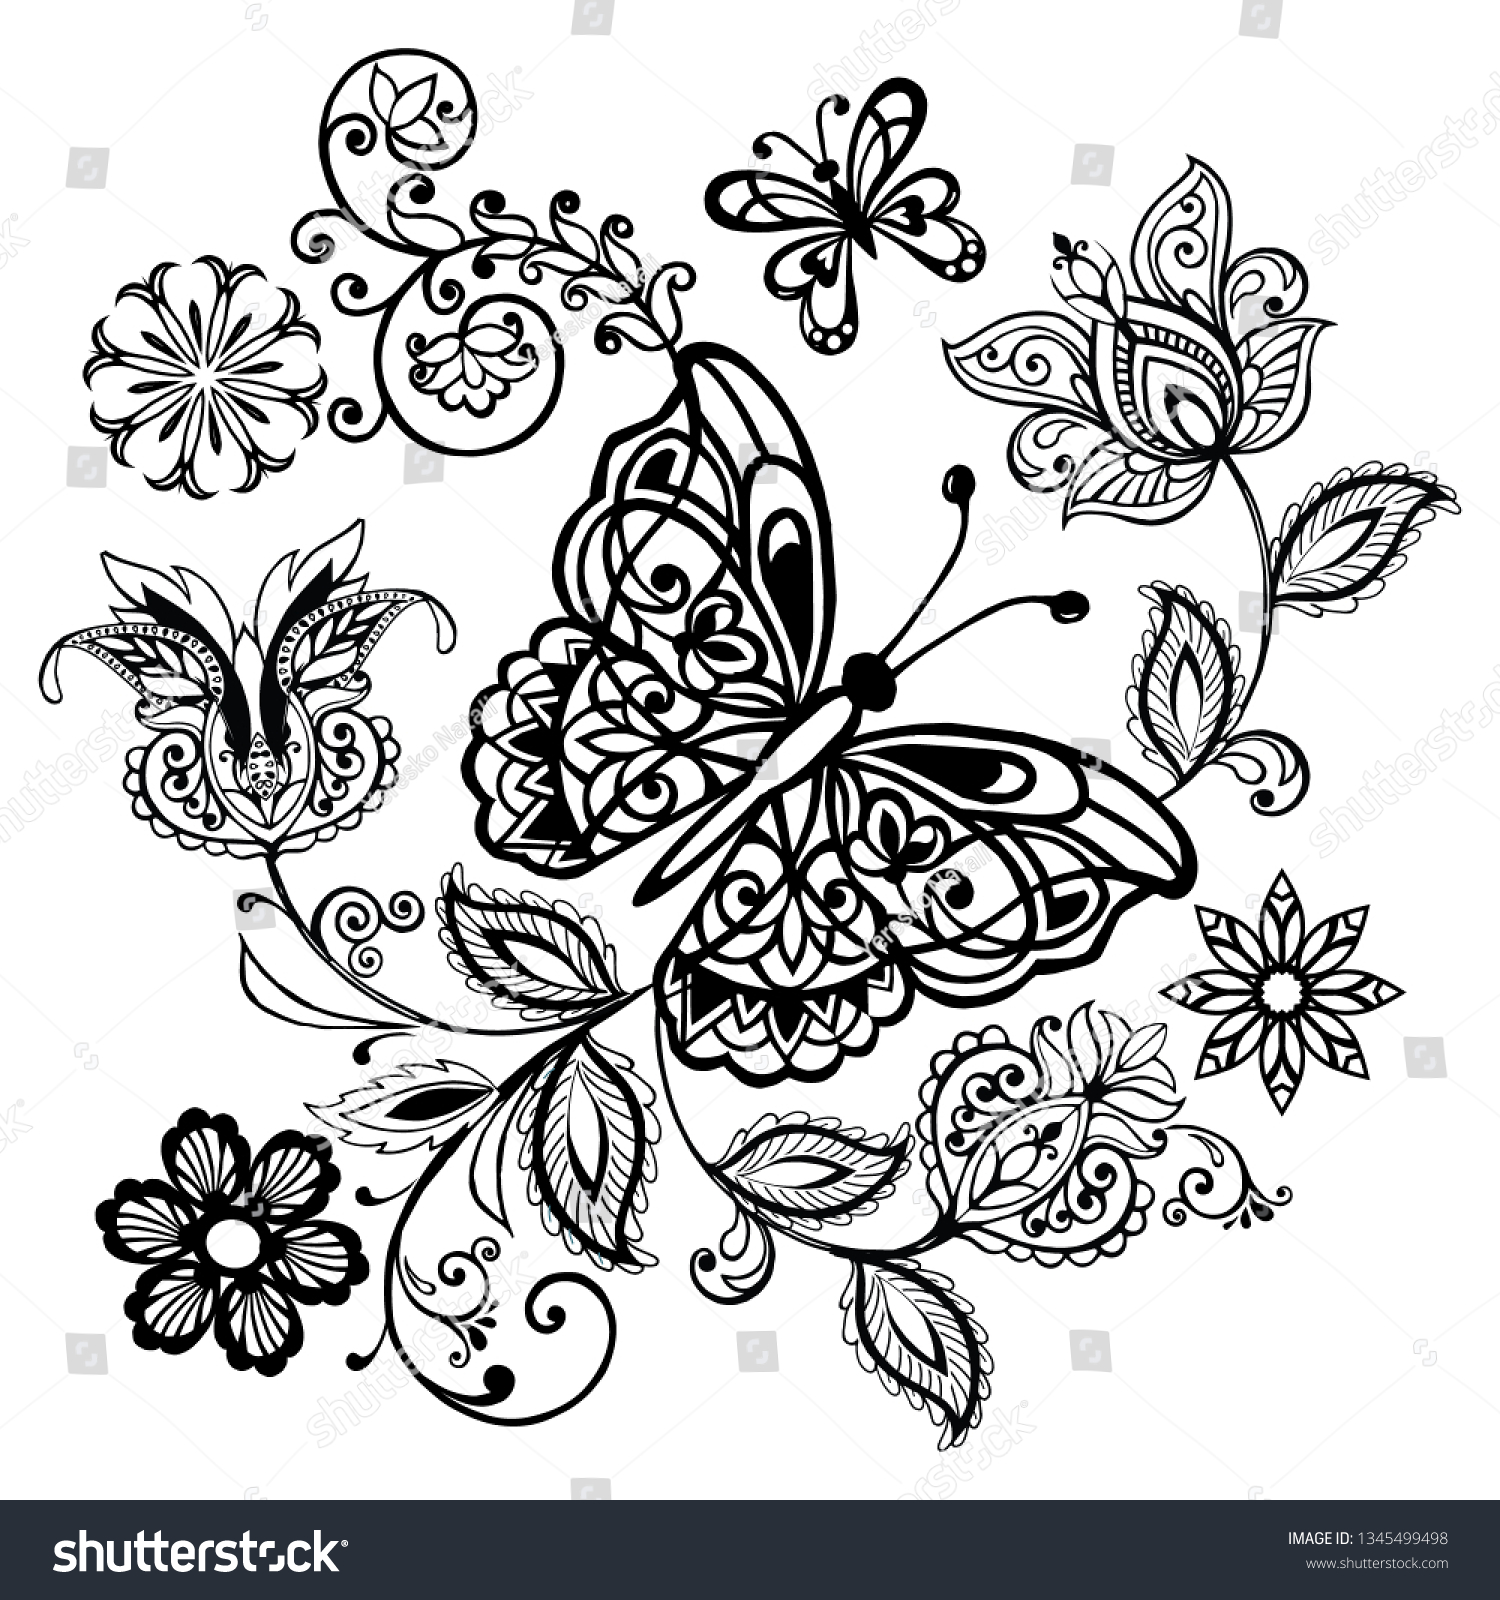 Decorative Butterfly Floral Ornament Anti Stress Stock Vector ...